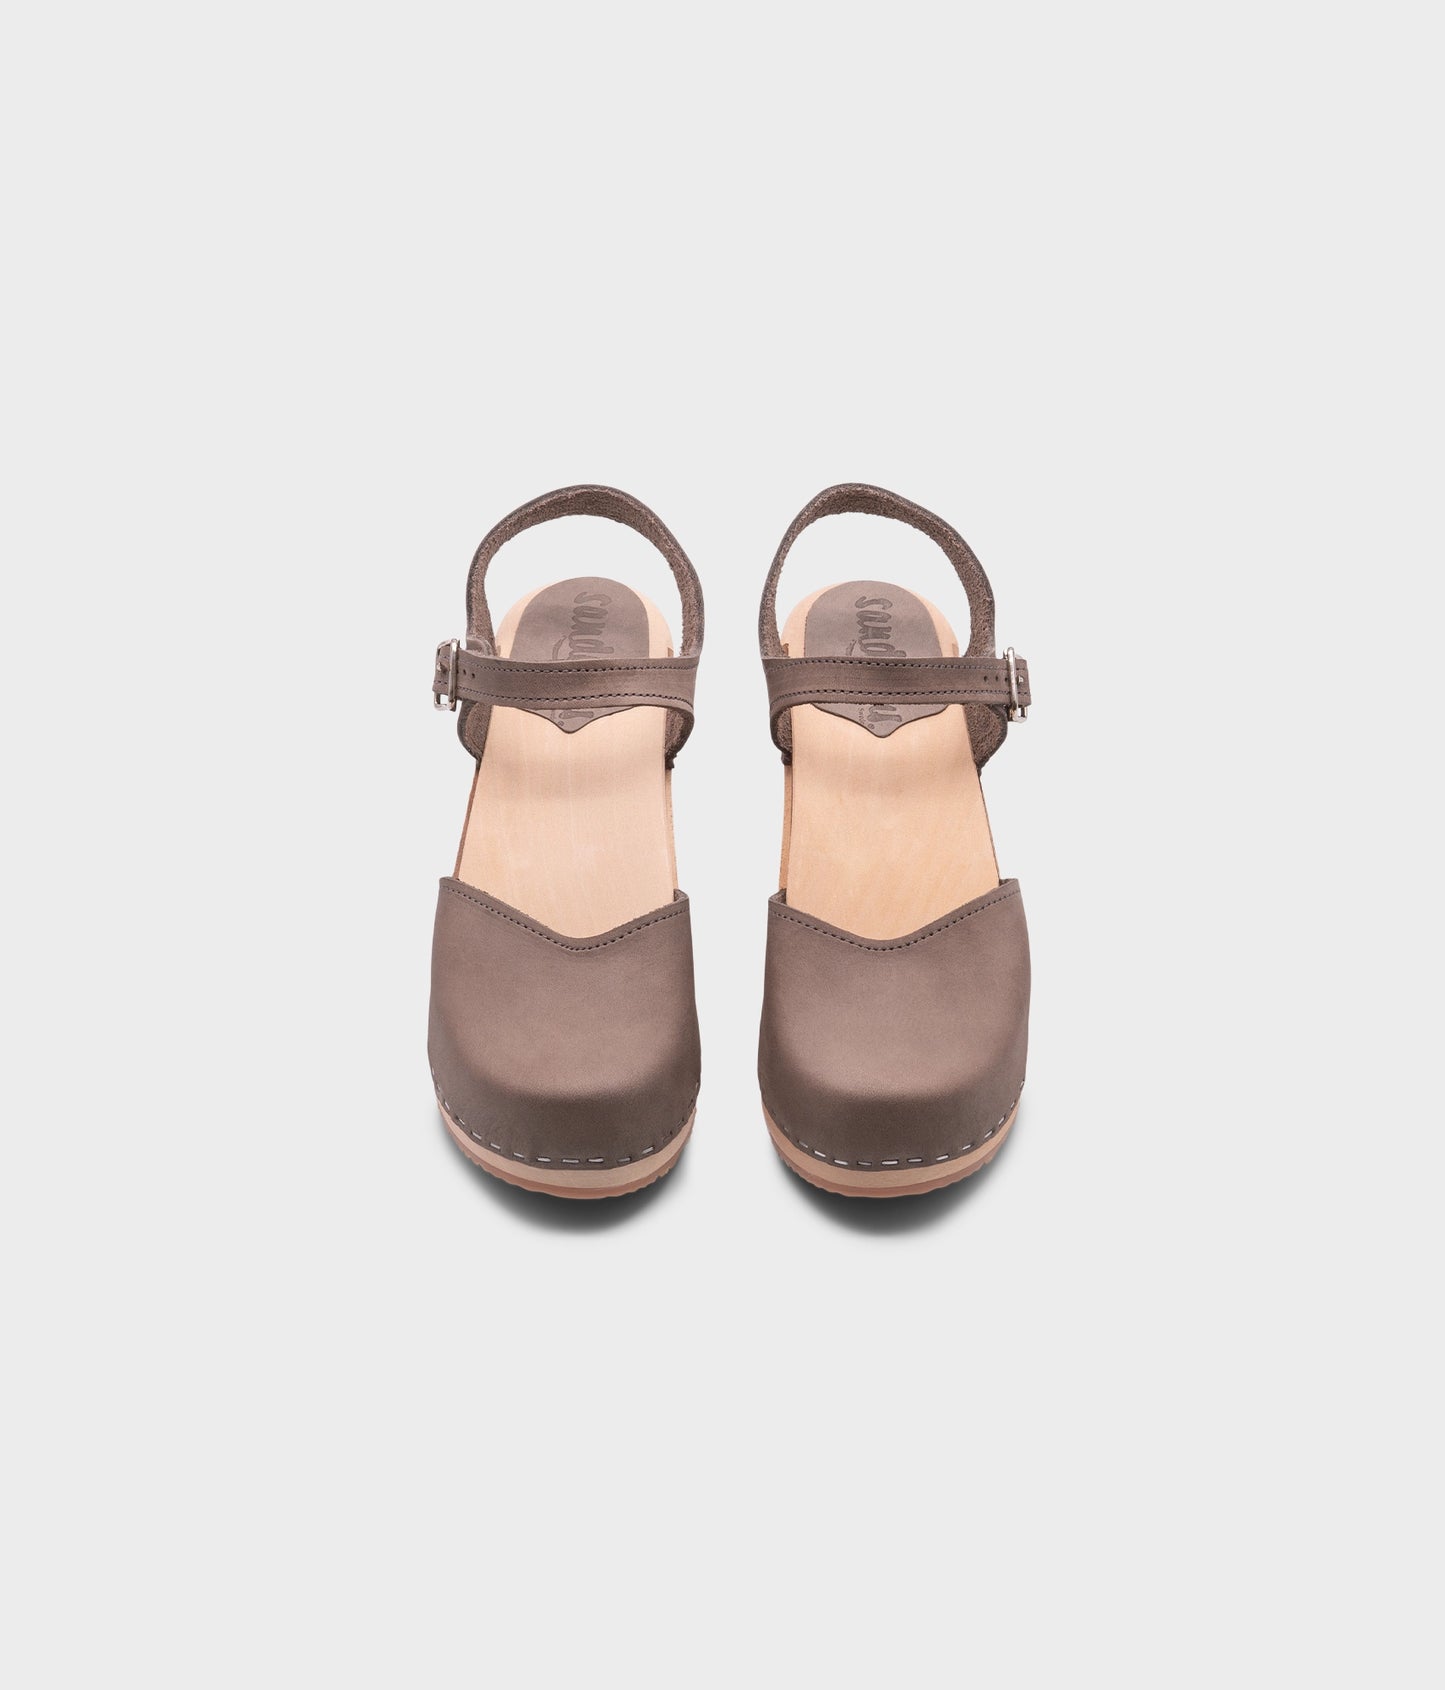 high heeled closed-toe clog sandal in stone grey nubuck leather stapled on a light wooden base